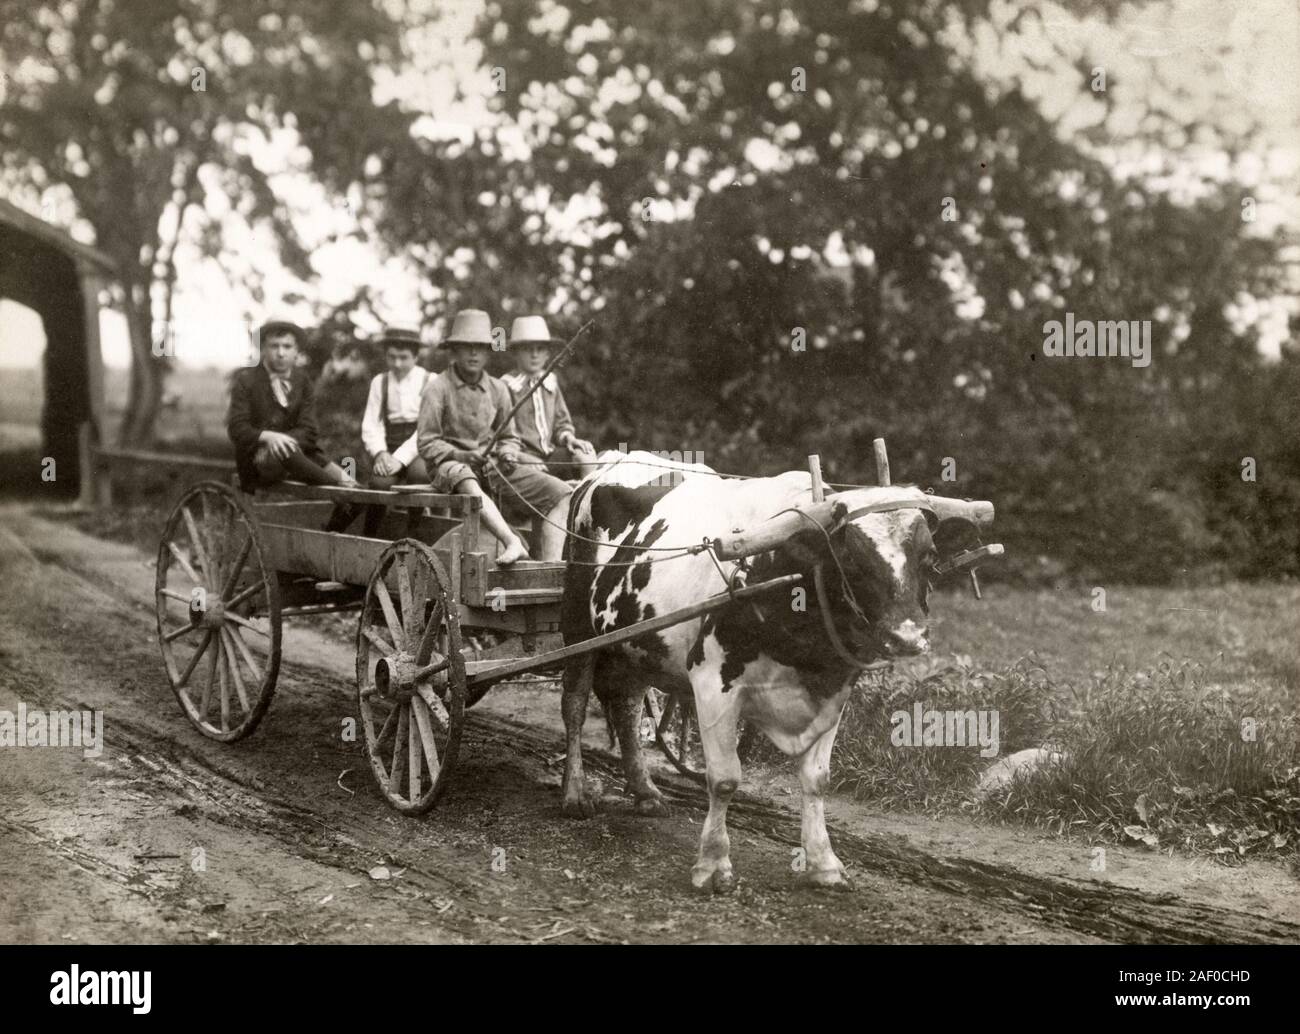 Farming in Canada c.1920 - four farm children on a cart drawn by an ox / bullock in harness Stock Photo